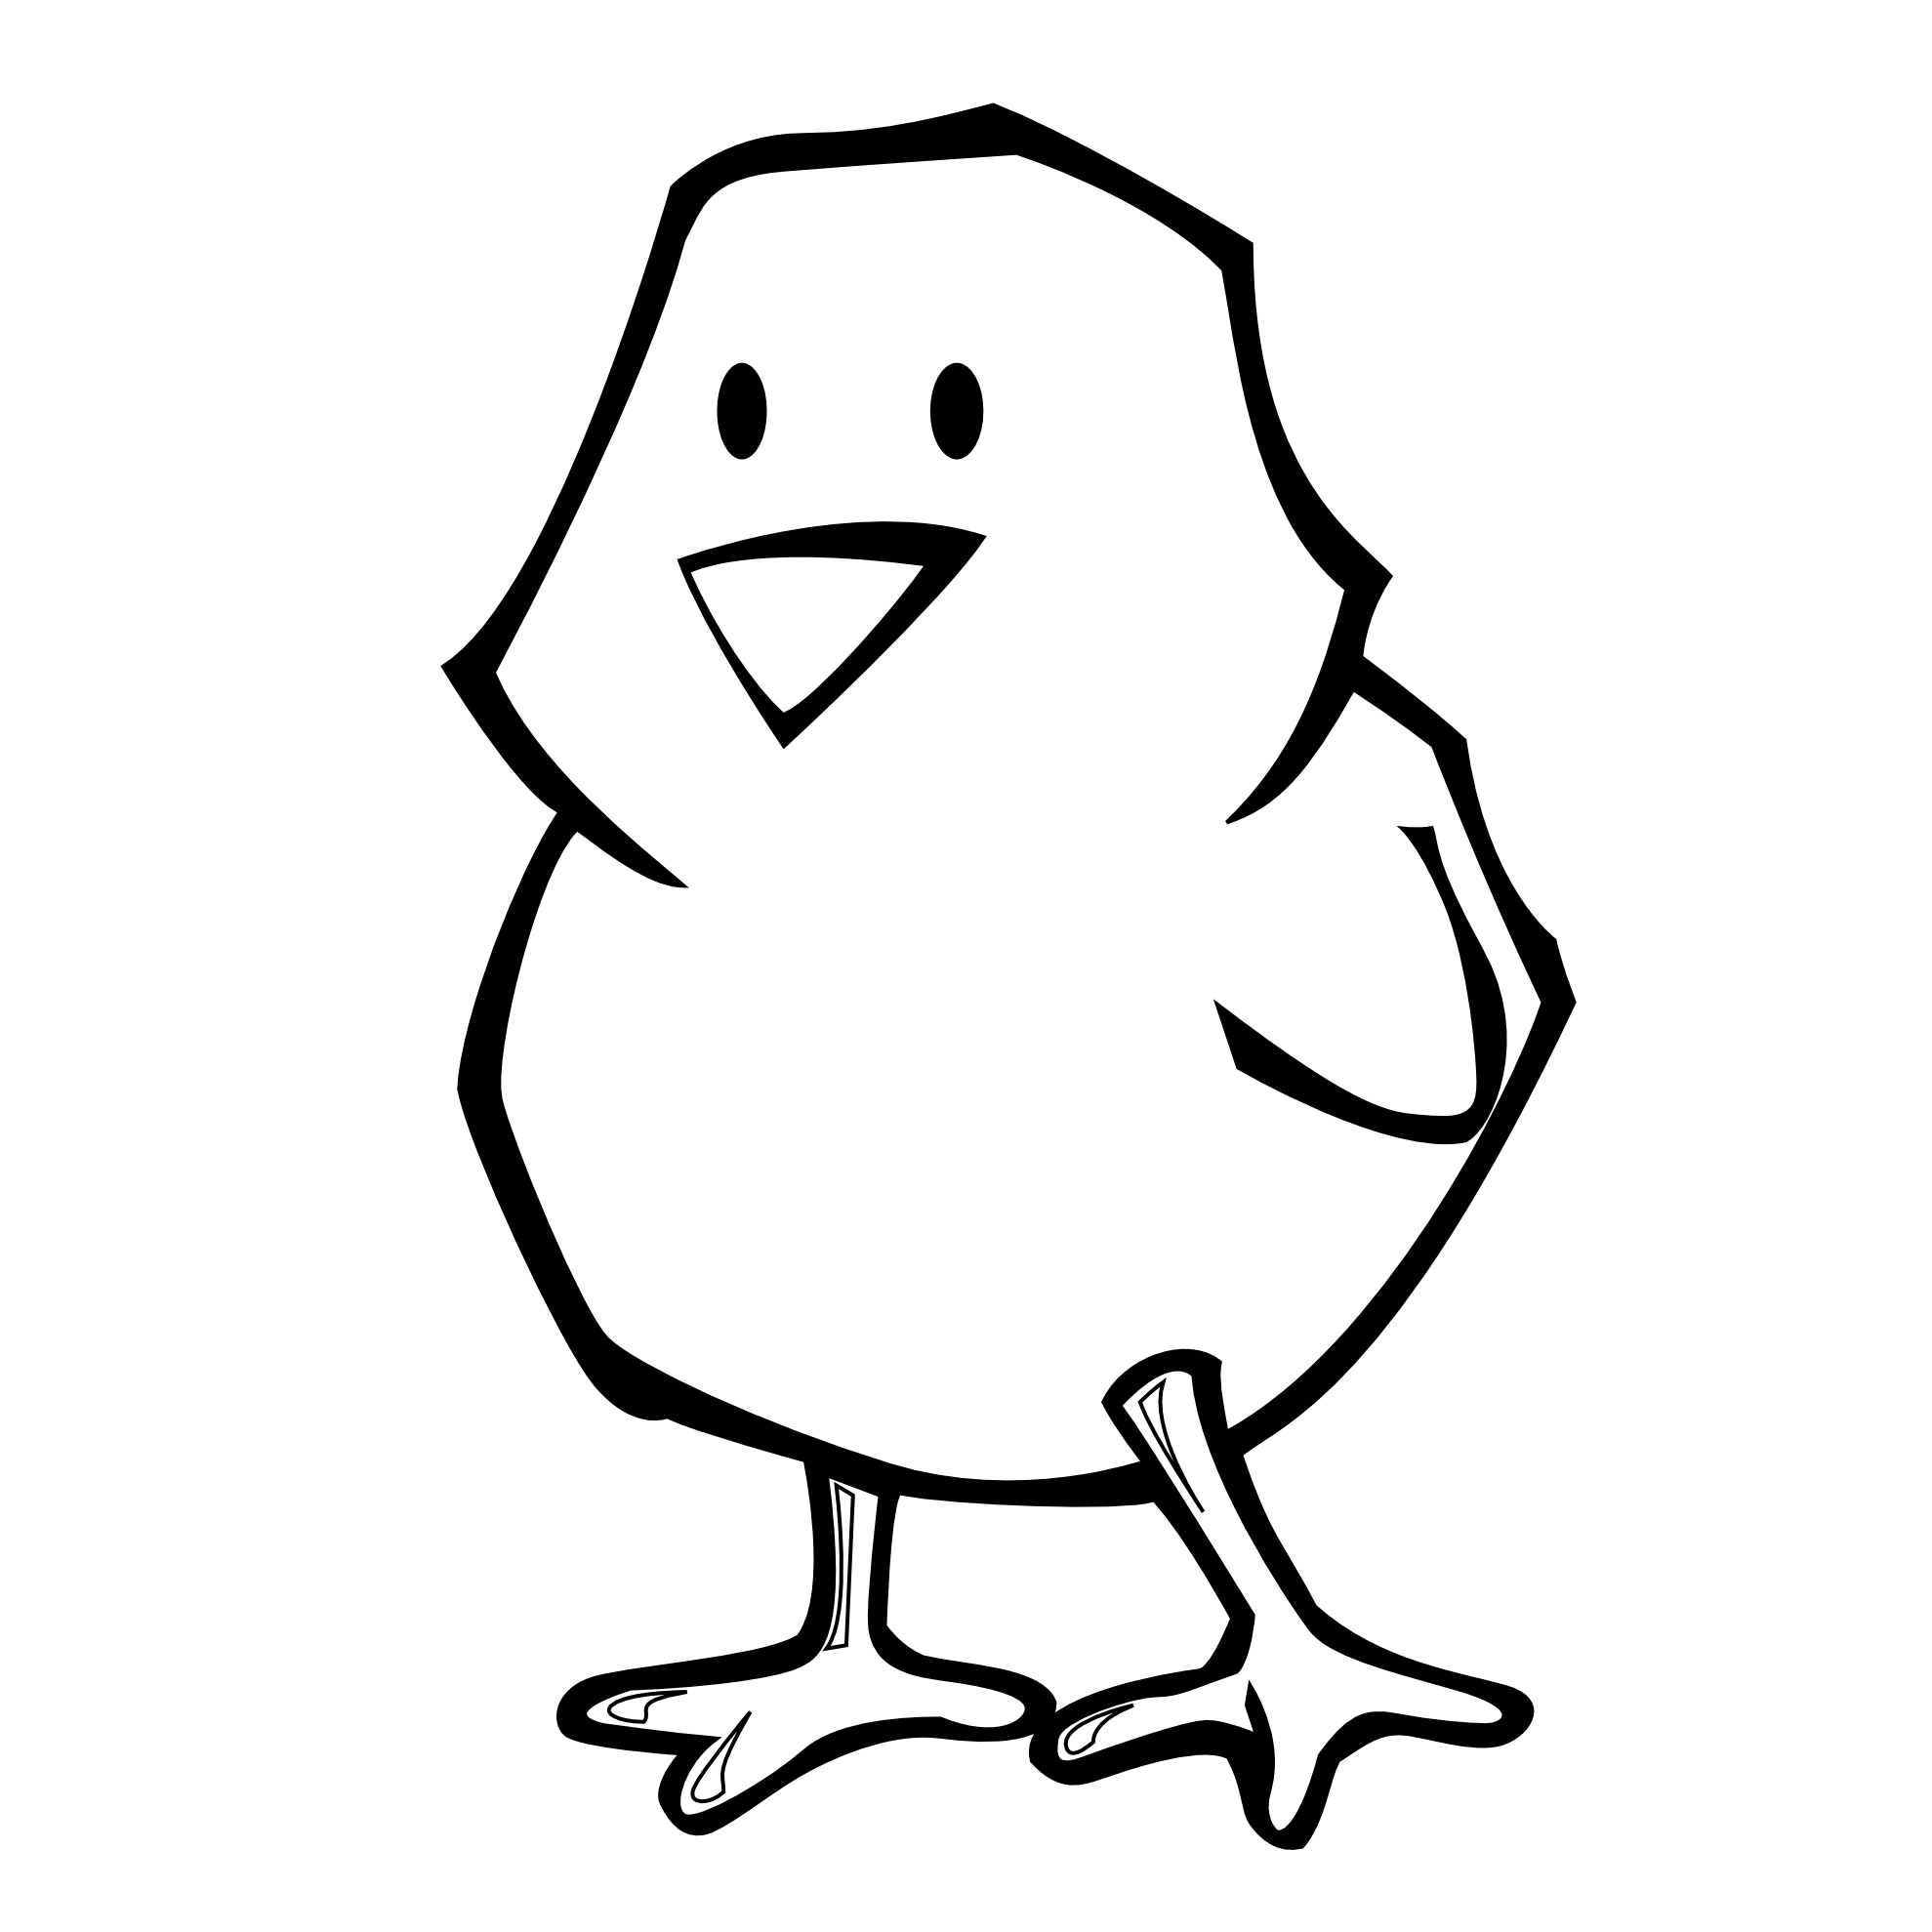 Chick Clipart Black And White - ClipArt Best